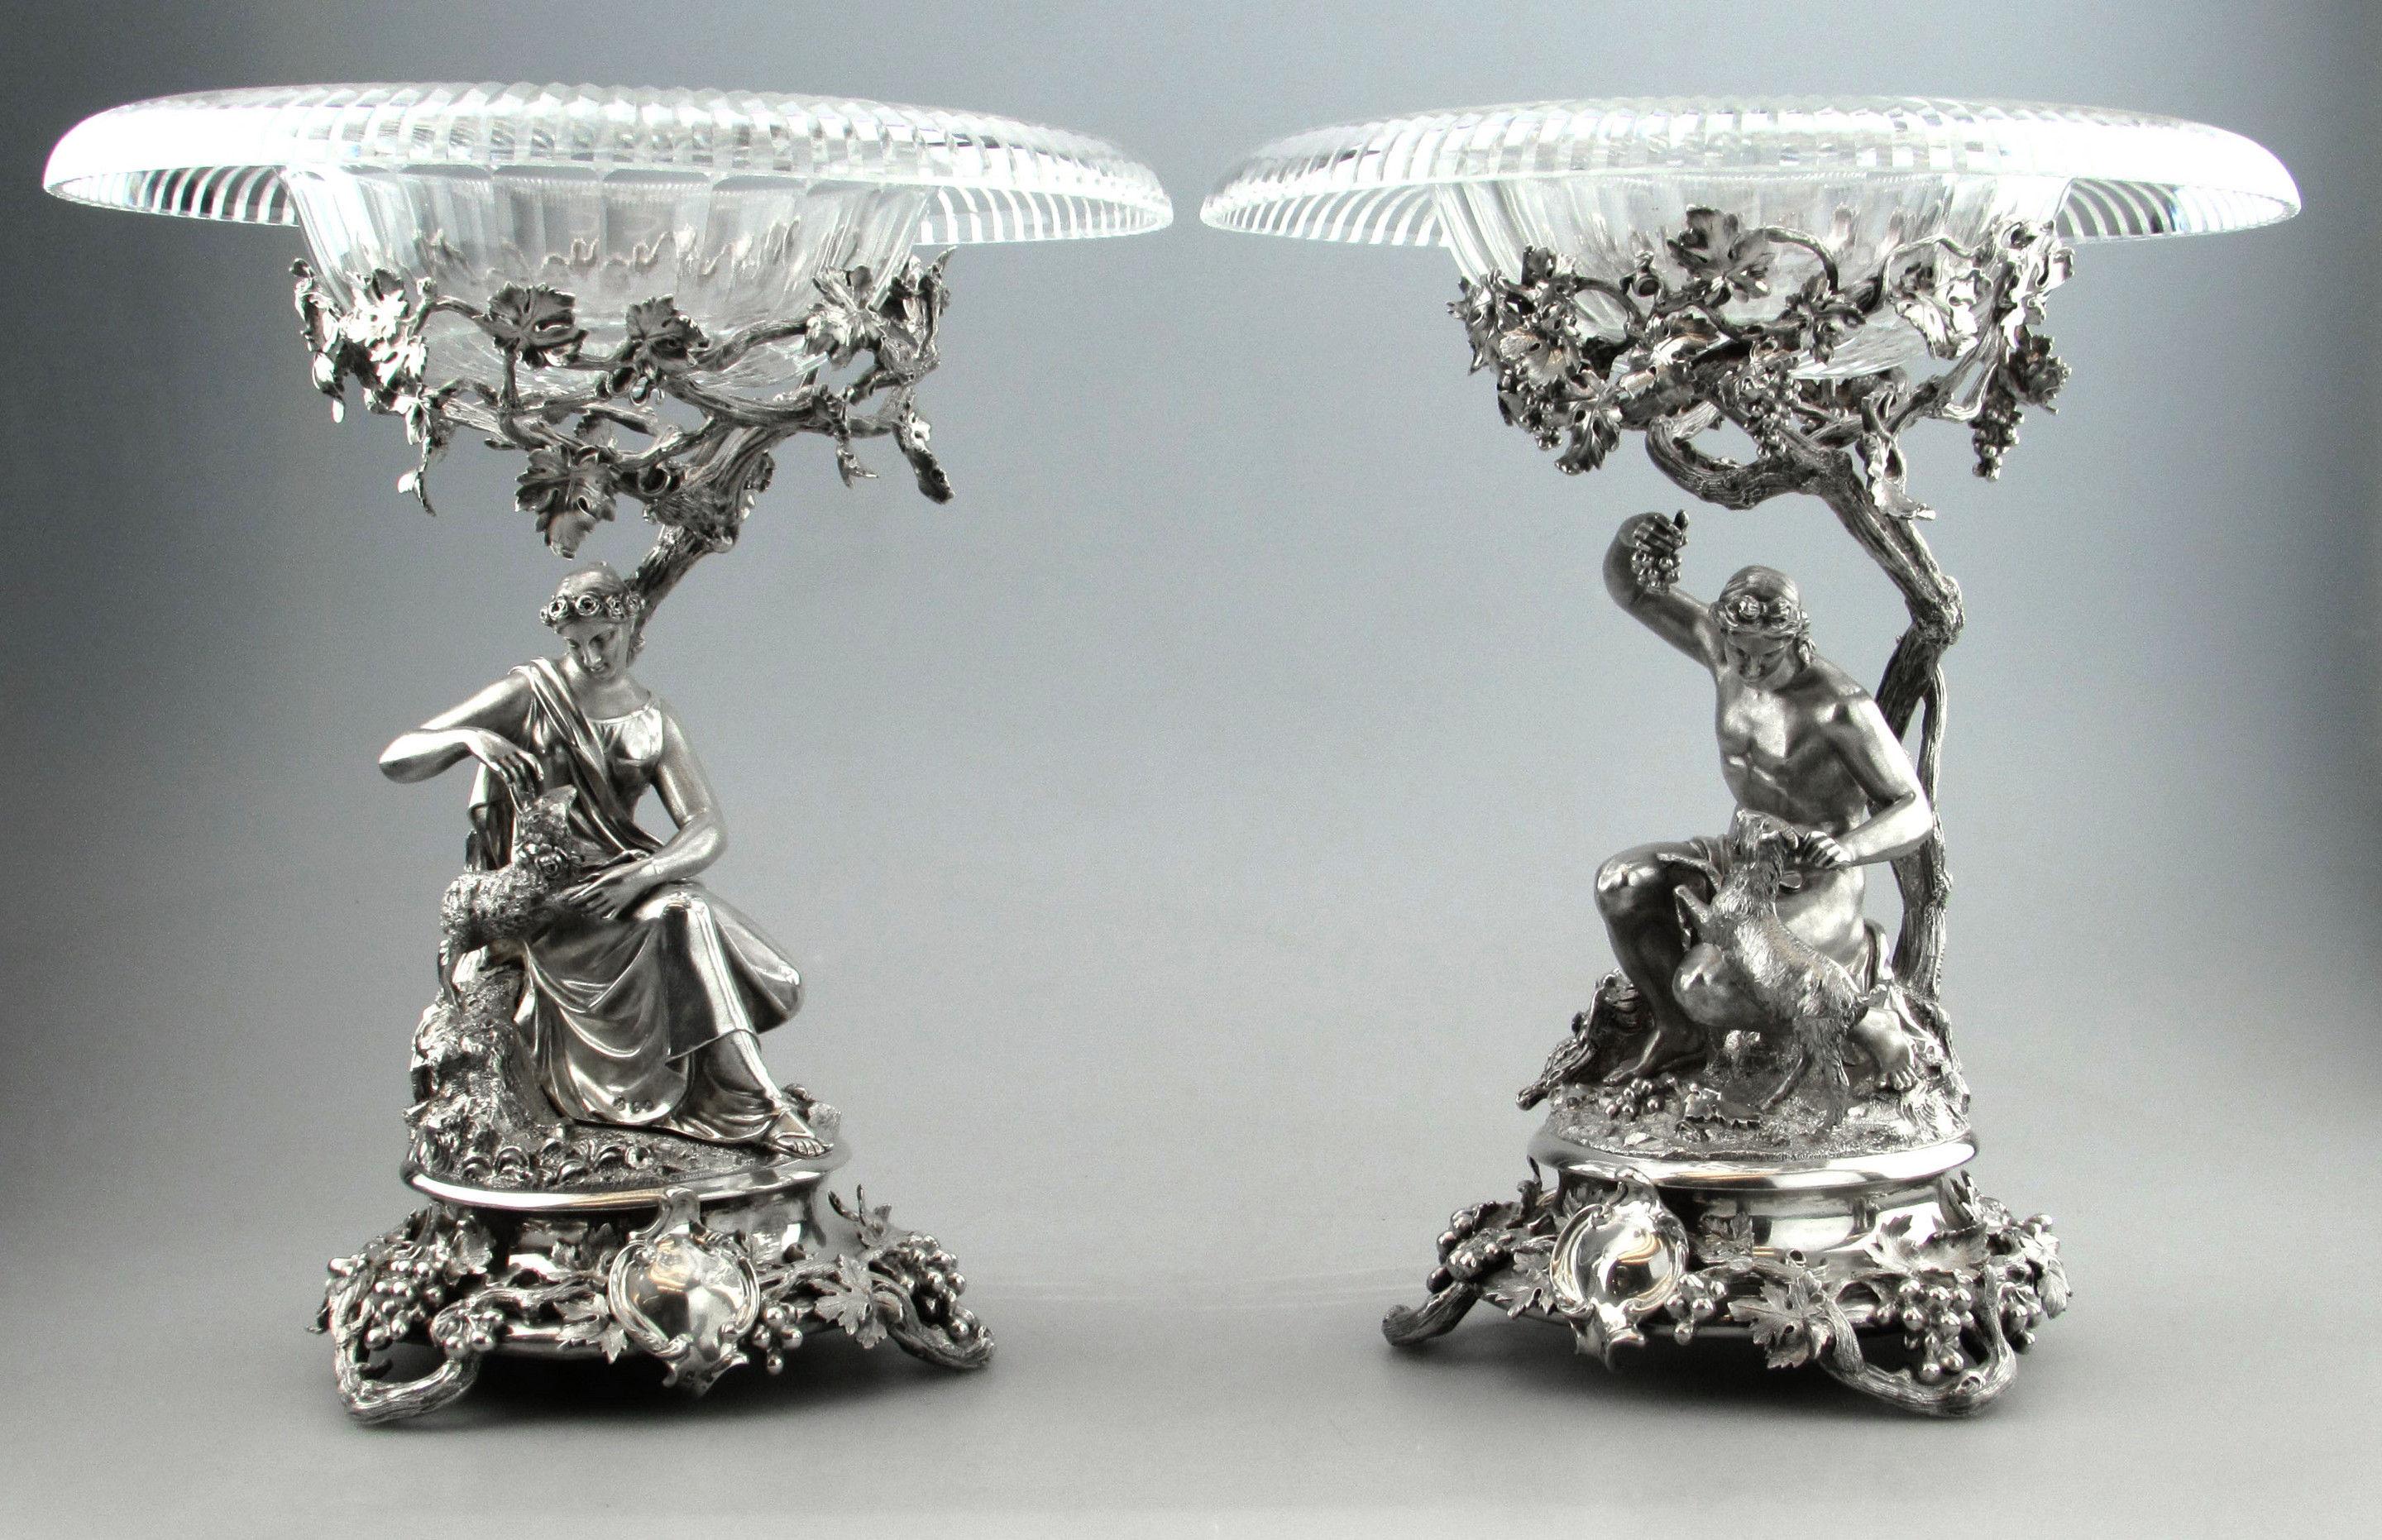 A pair of impressive antique Victorian silver comports with magnificent silver bases supporting elegant cut glass dishes. The silver bases each show a mythological style figure, one of a woman with a lamb beside her and a young man with a goat. The